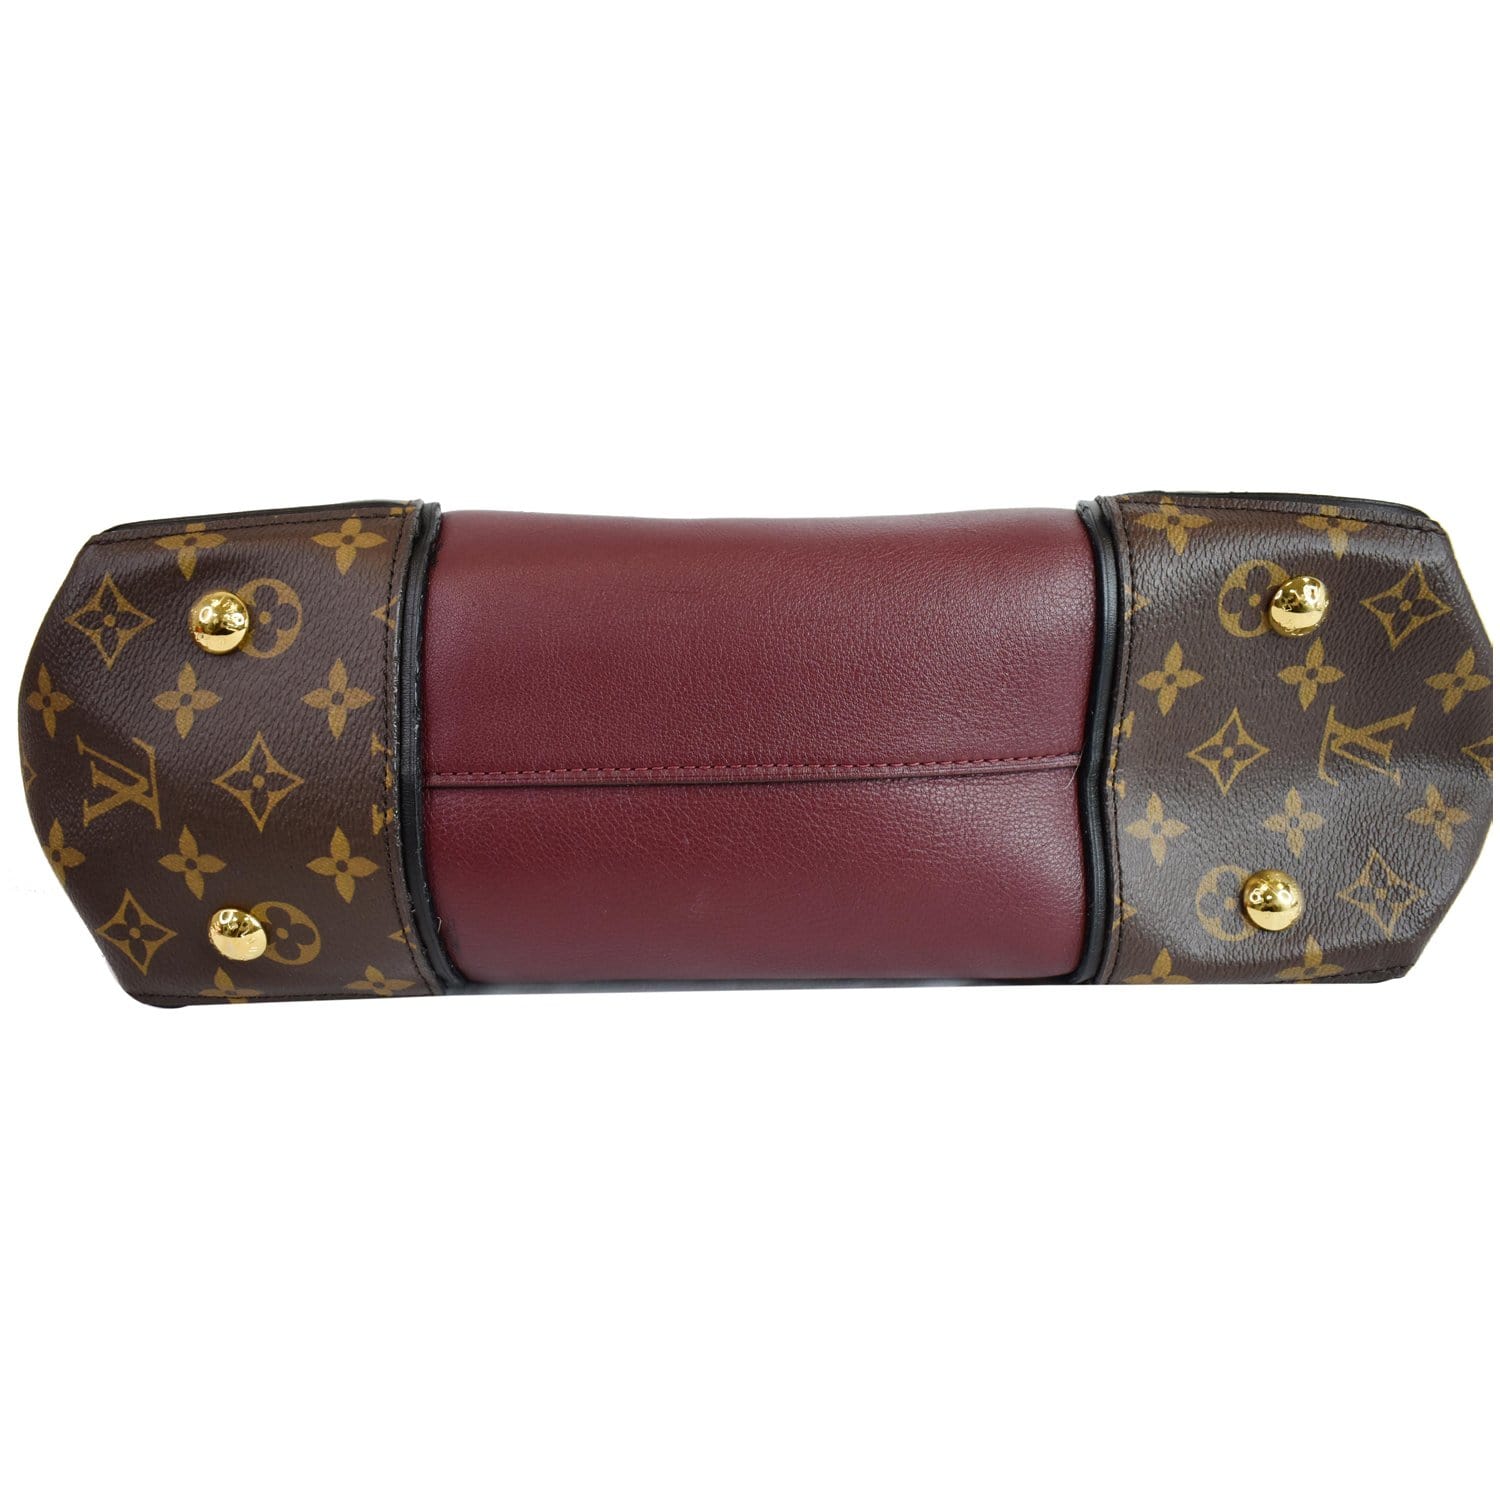 Pre-owned Louis Vuitton Leather Shoulder Bag In Burgundy